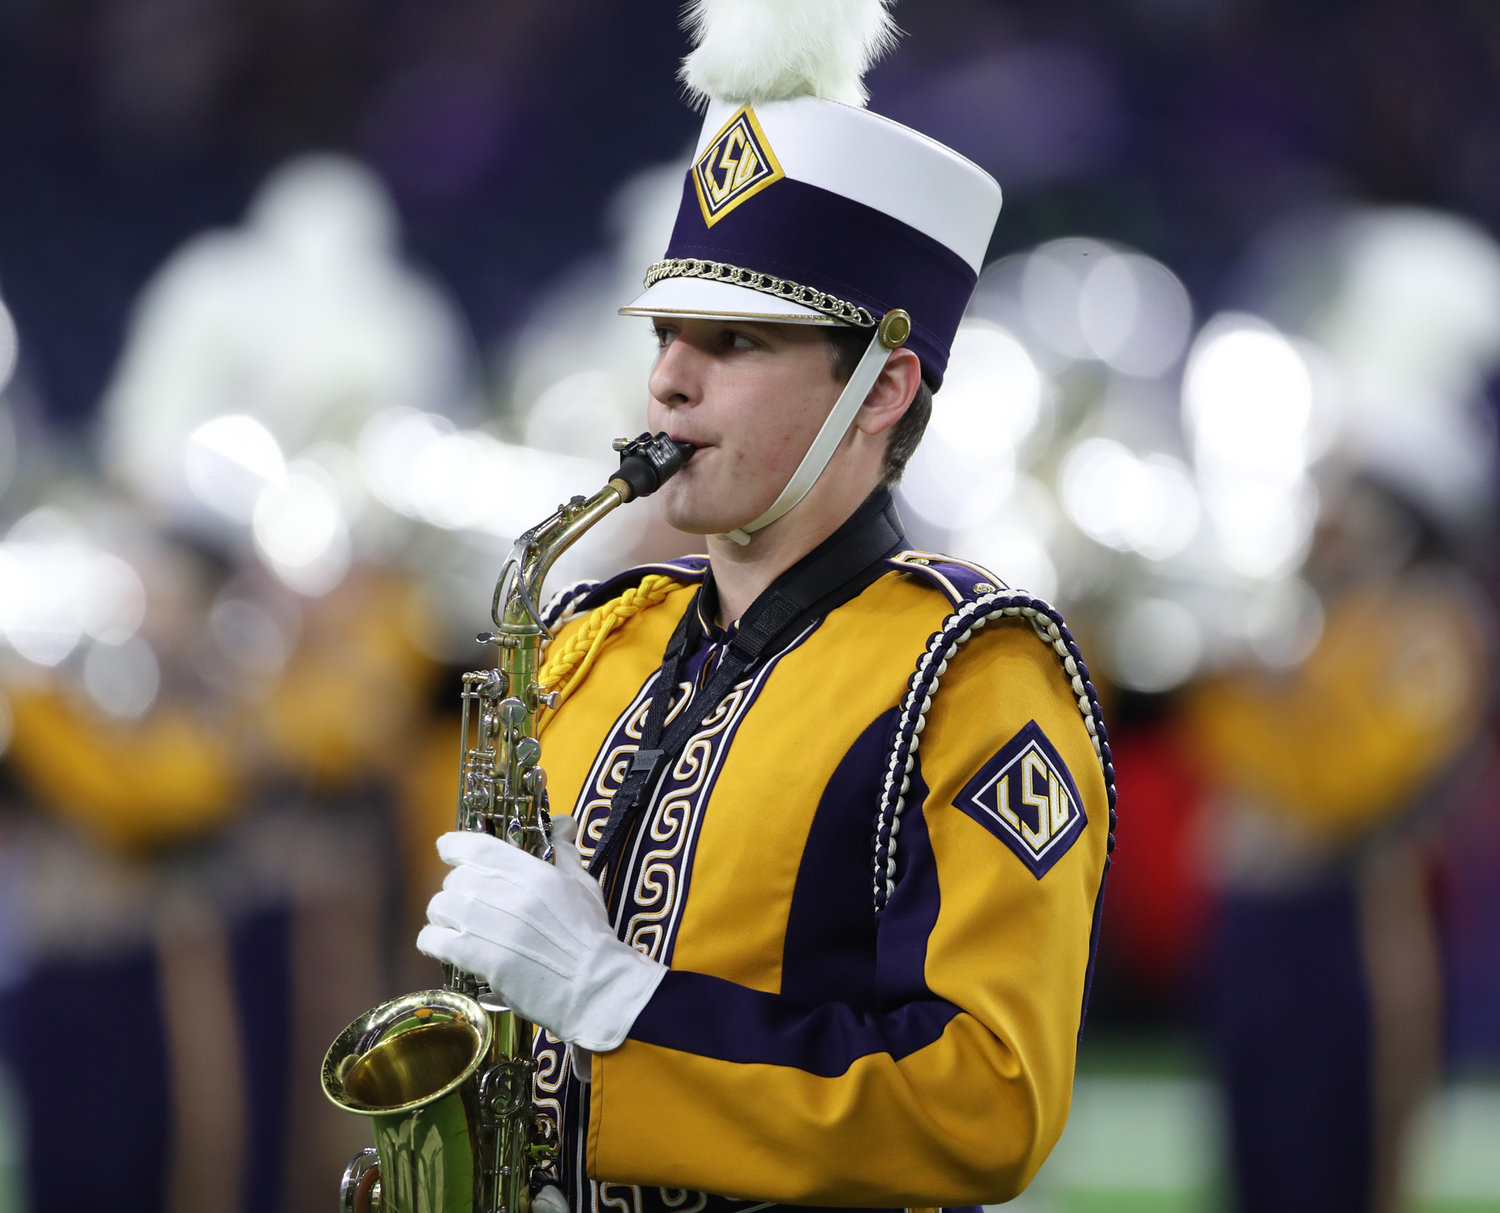 A member of the LSU Tigers band performs before the start of the TaxAct Texas Bowl on Jan. 4, 2022 in Houston, Texas.